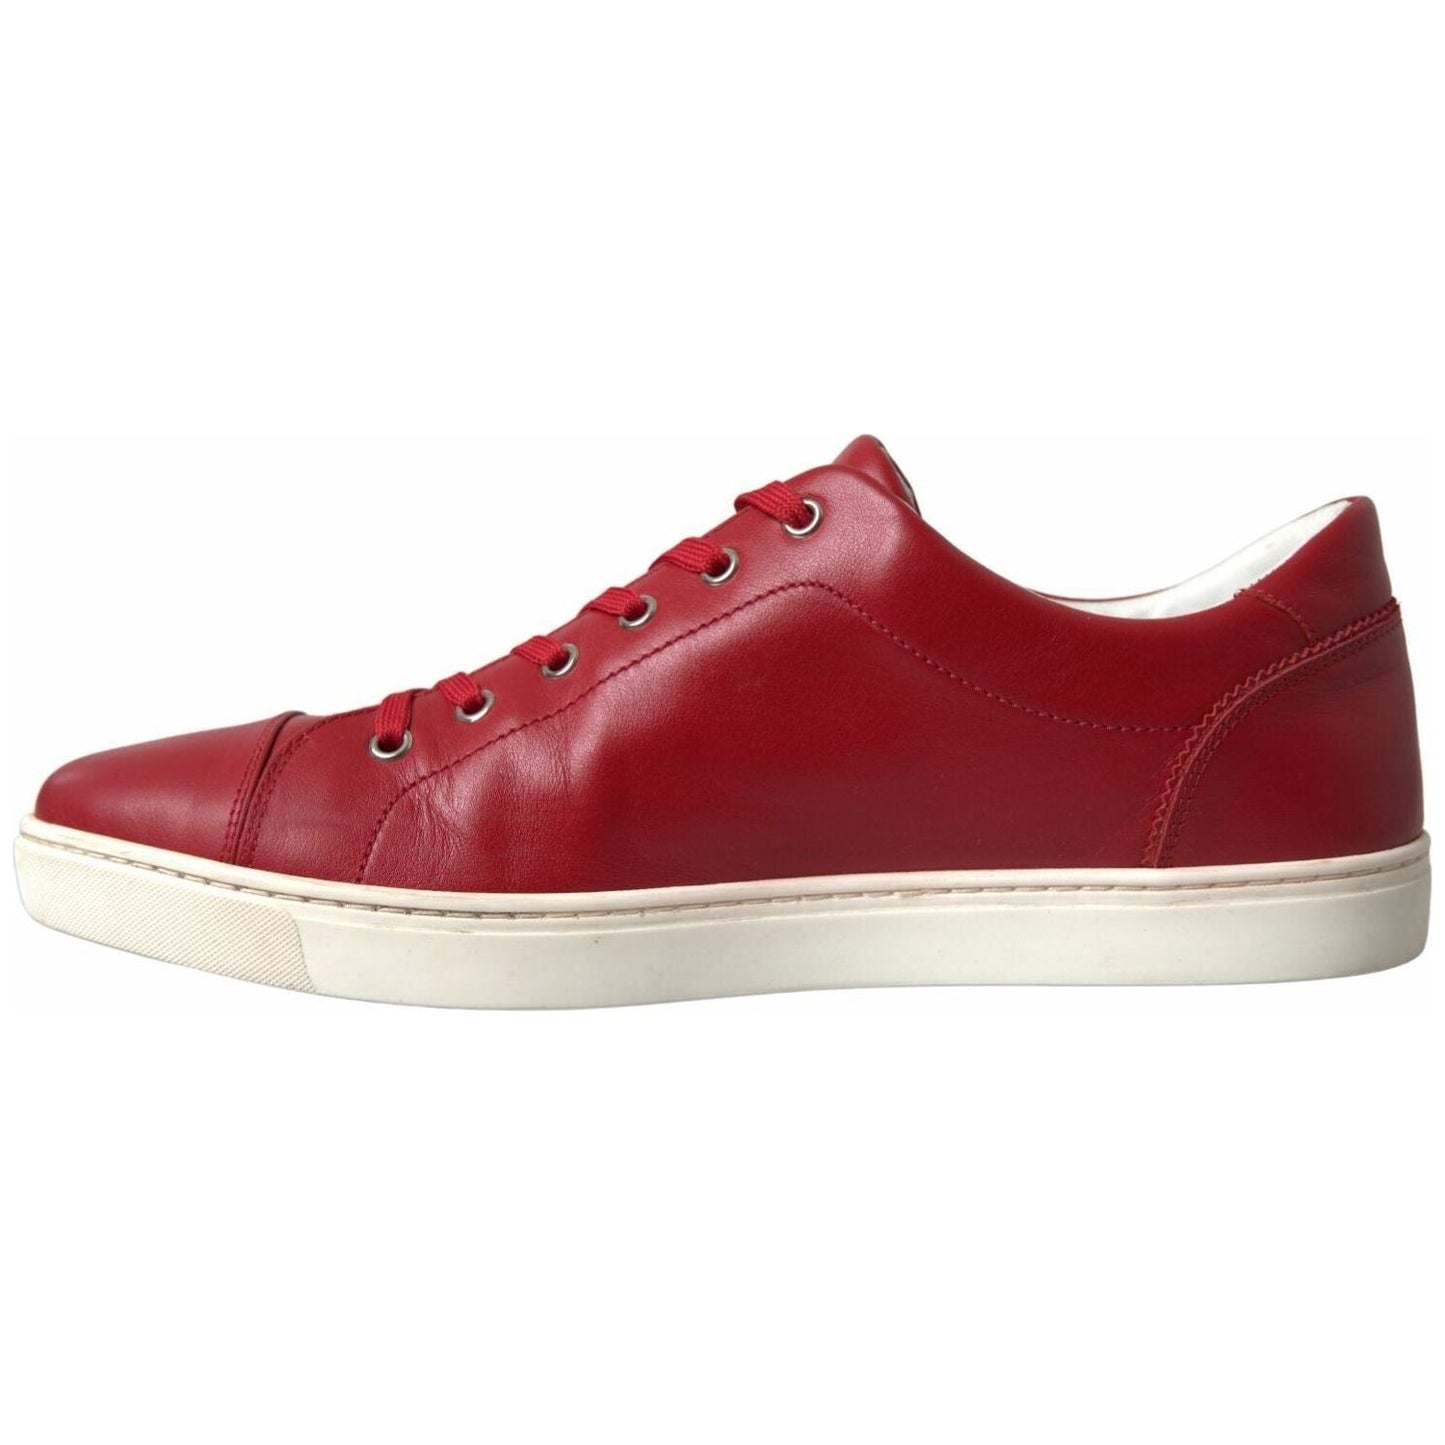 Dolce & Gabbana Elegant Red Leather Low Top Sneakers shoes-red-portofino-leather-low-top-mens-sneakers 2-scaled-068ad020-fb4.jpg